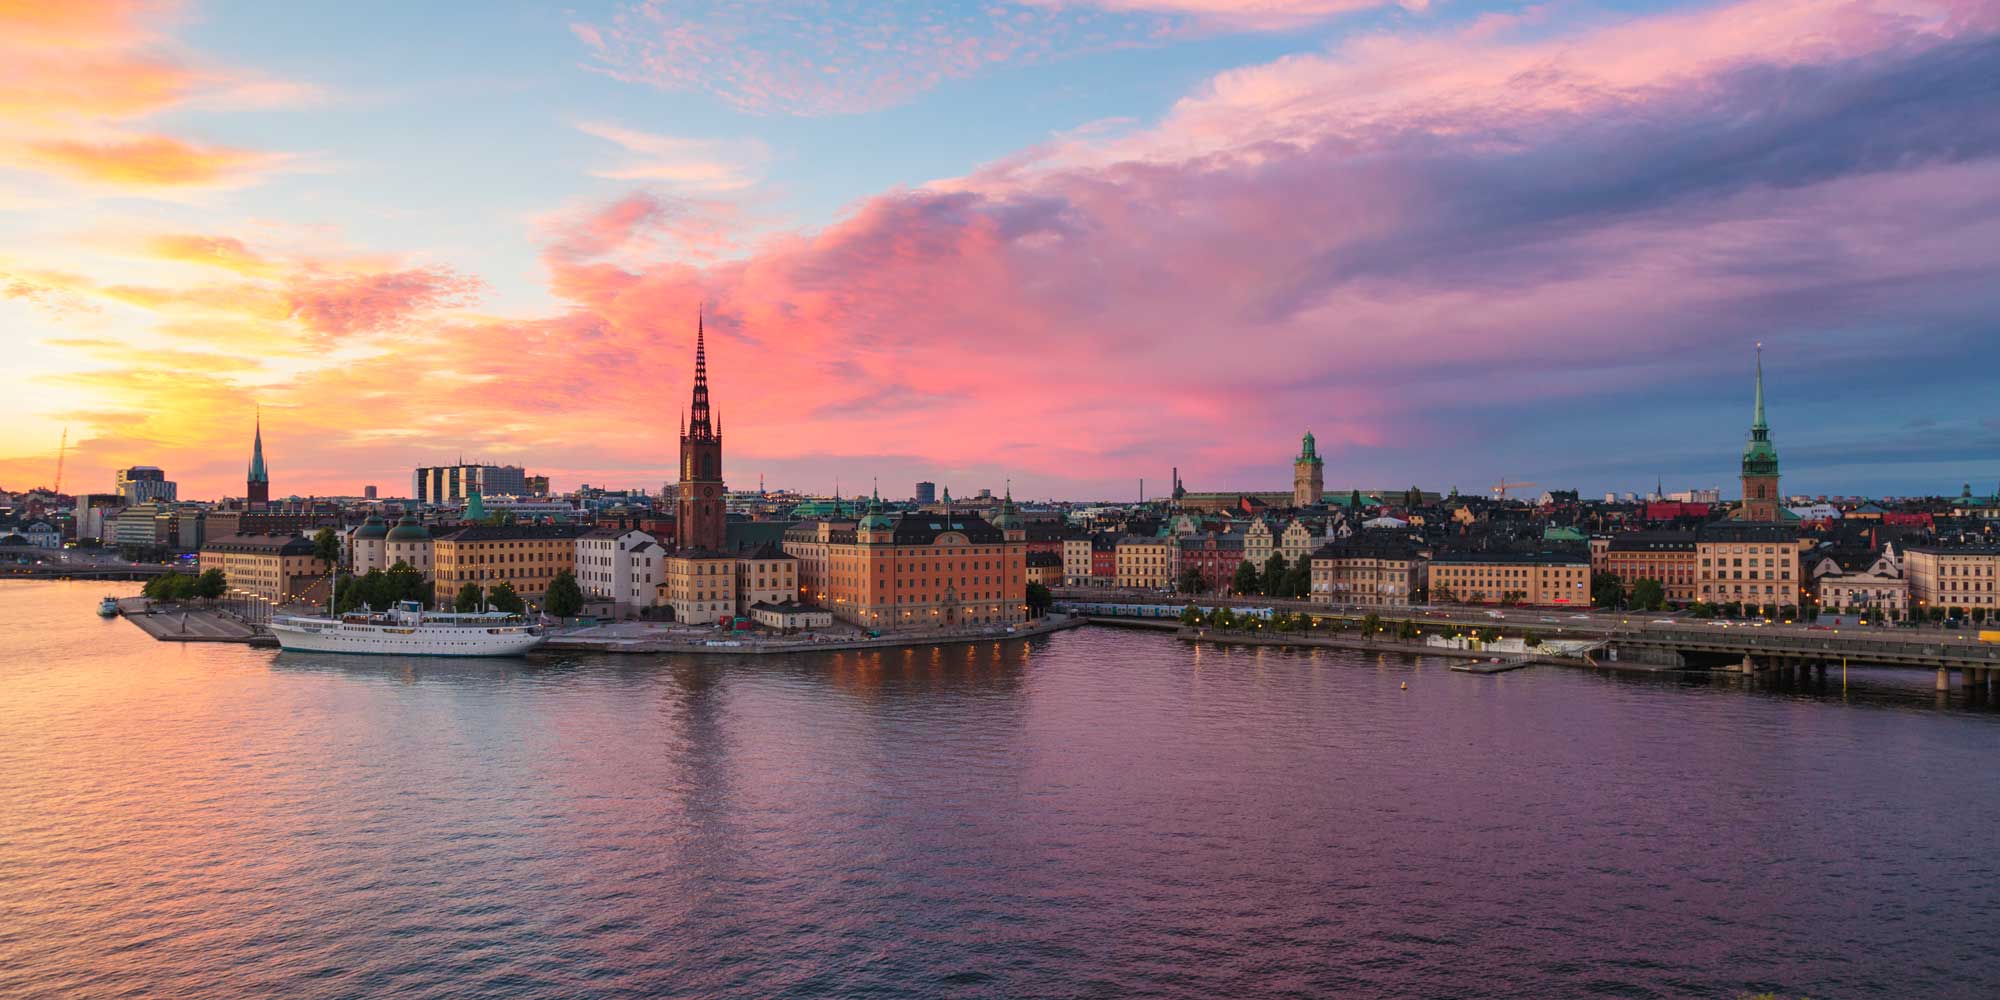 Stockholm City skyline in a beautiful sunset.